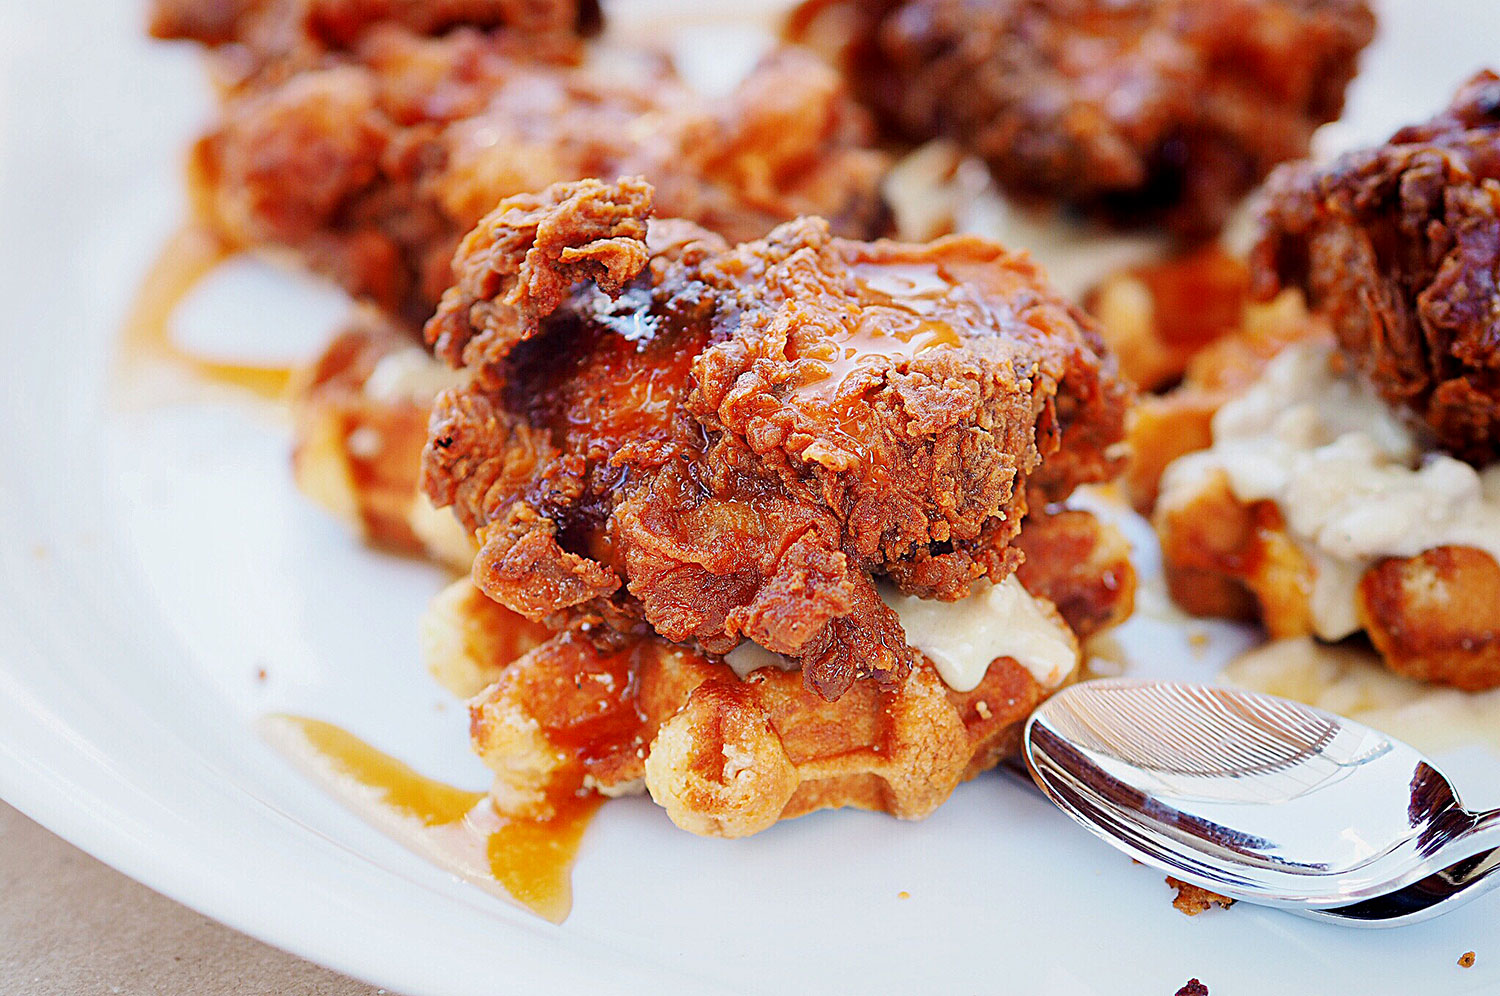 Sydney Food Blog Review of Best of Brunch, Good Food Month 2015: Fried Chicken and Waffles, Hartsyard